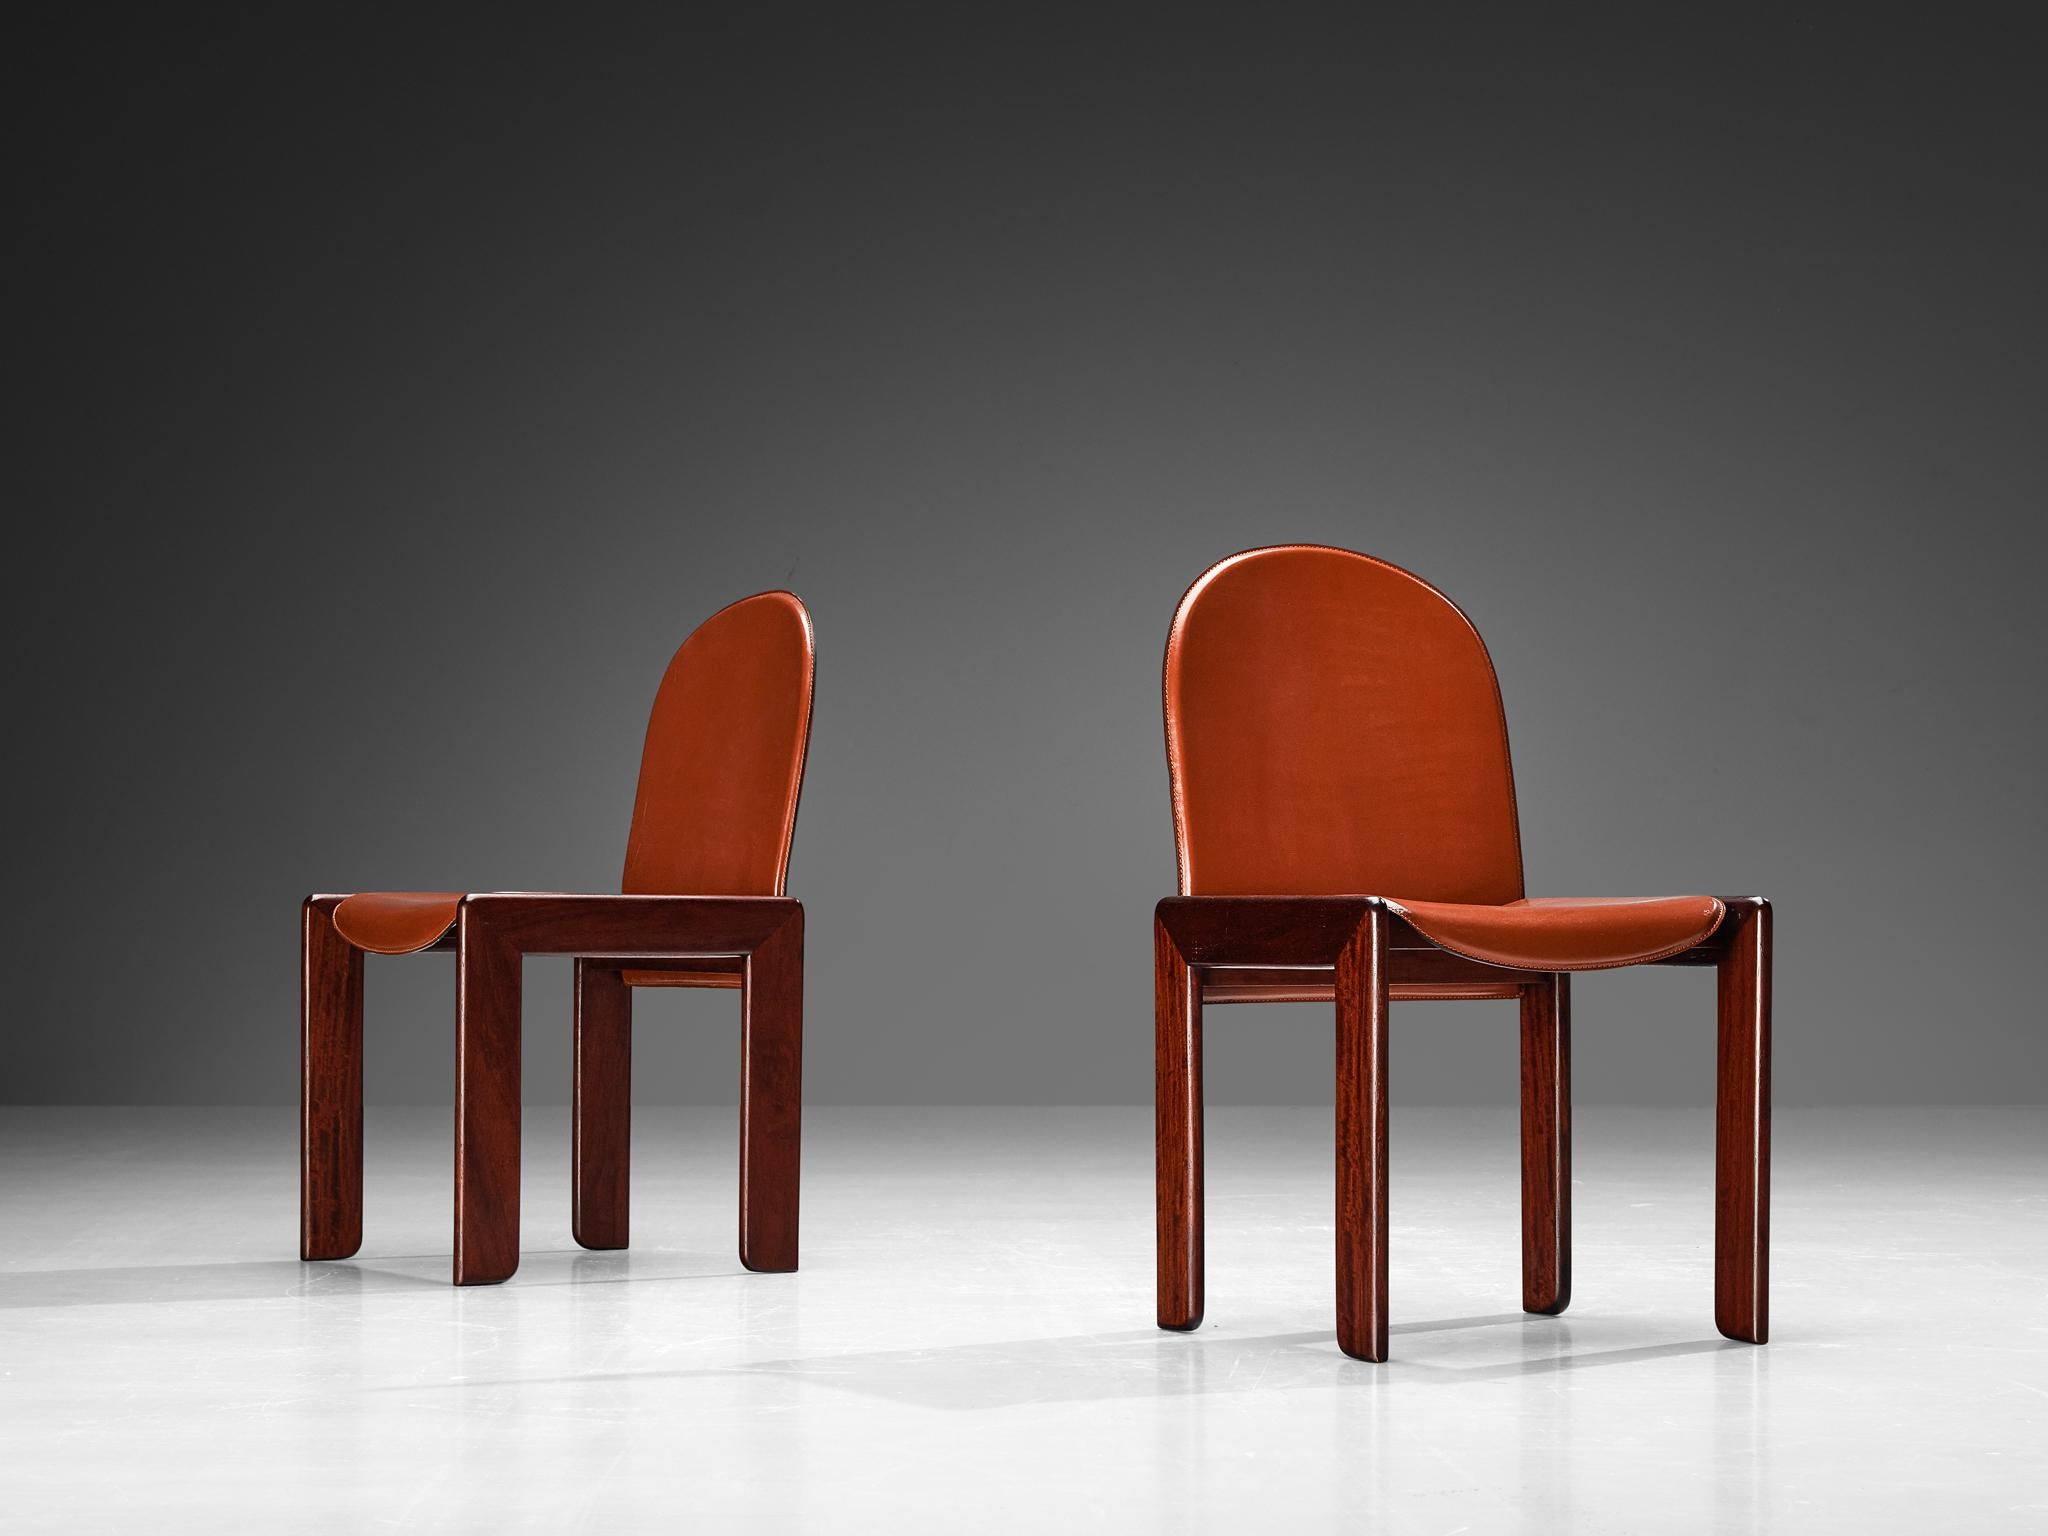 Borghi Cantù, pair of dining chairs, saddle leather, stained wood, Italy, 1970s

This ensemble of ten dining chairs embodies an austere aesthetic, yet the meticulous choice of materials and exceptional craftsmanship elevate them beyond mere simple